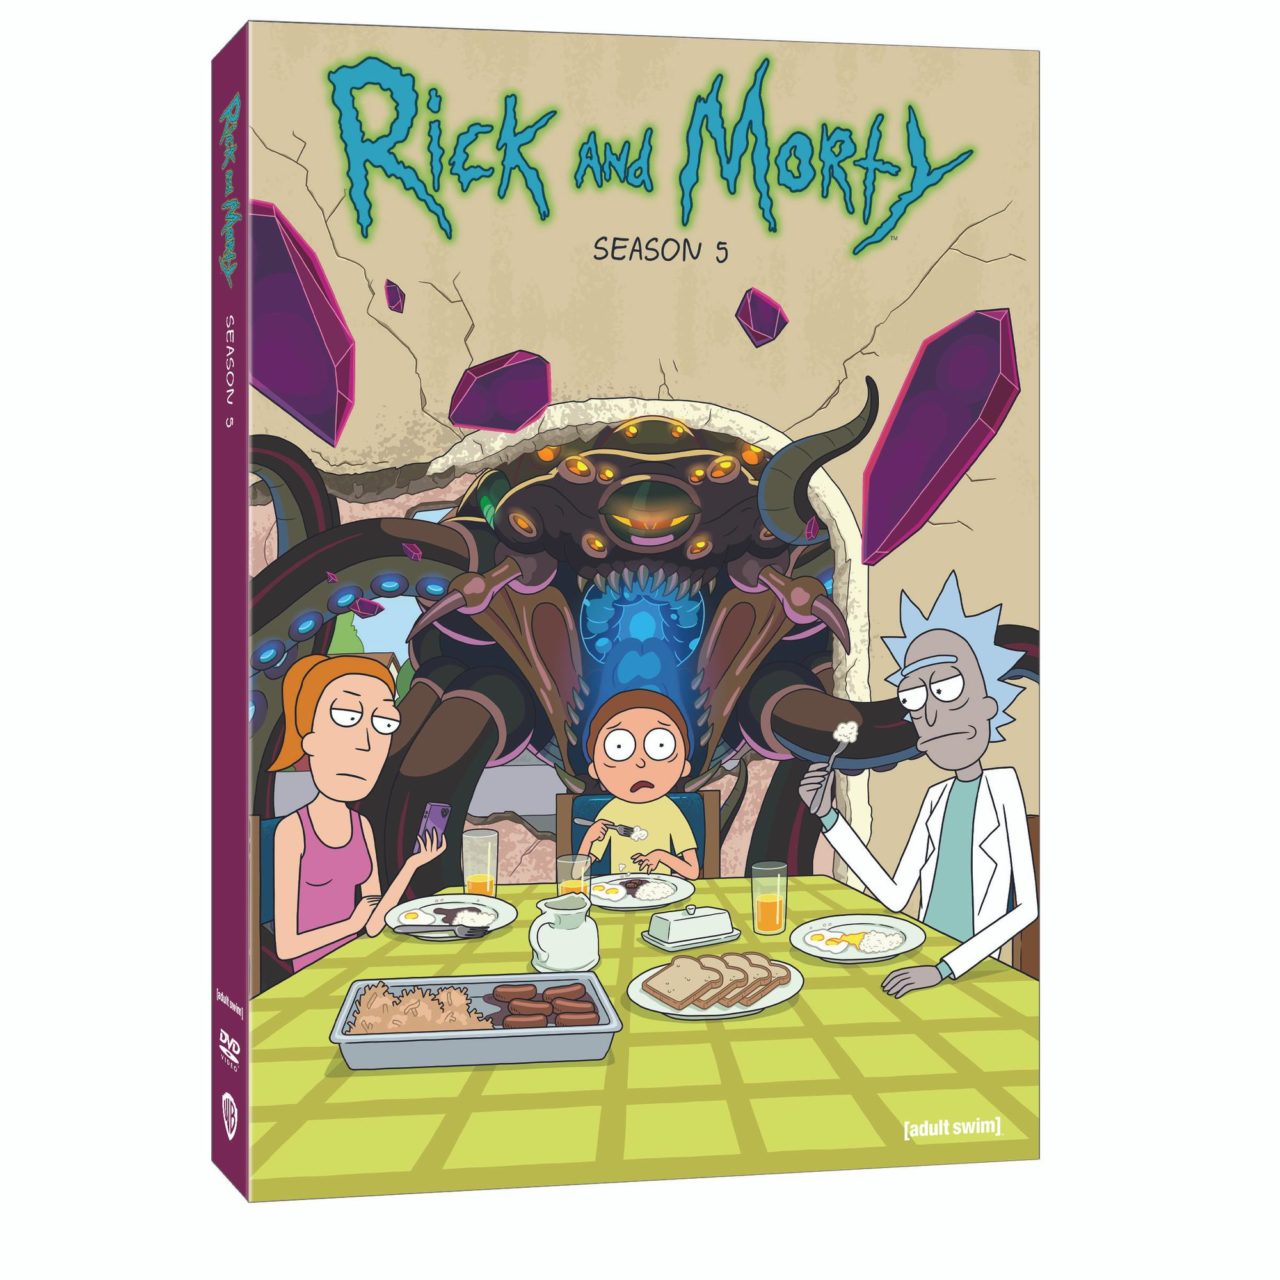 Rick And Morty: The Complete Fifth Season DVD cover (Warner Bros. Home Entertainment)